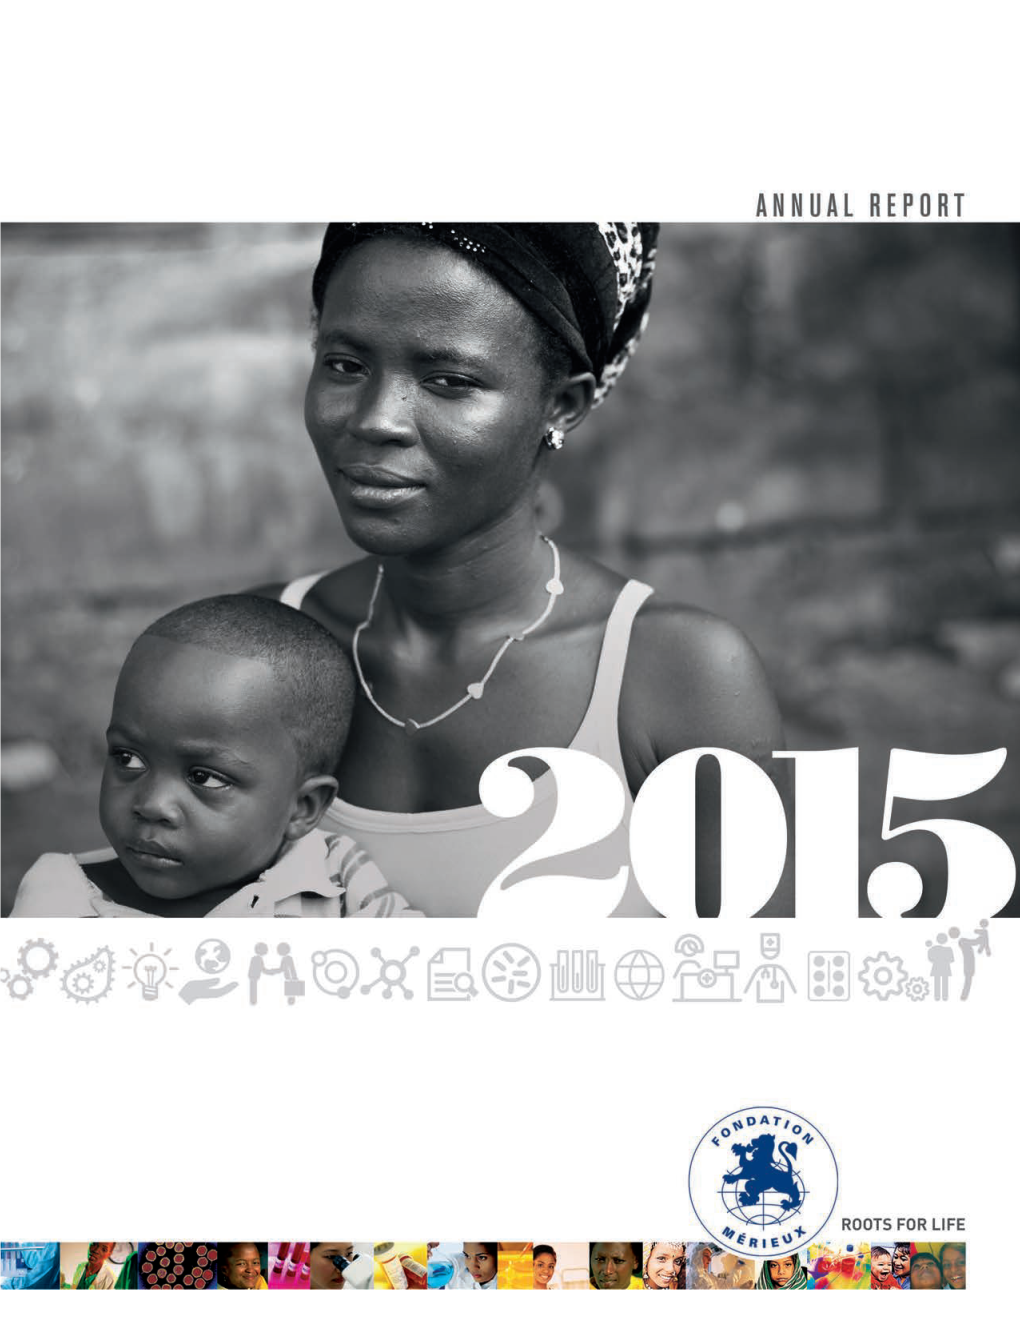 Annual Report 2015 Annual Report Fondation Mérieux Worldwide